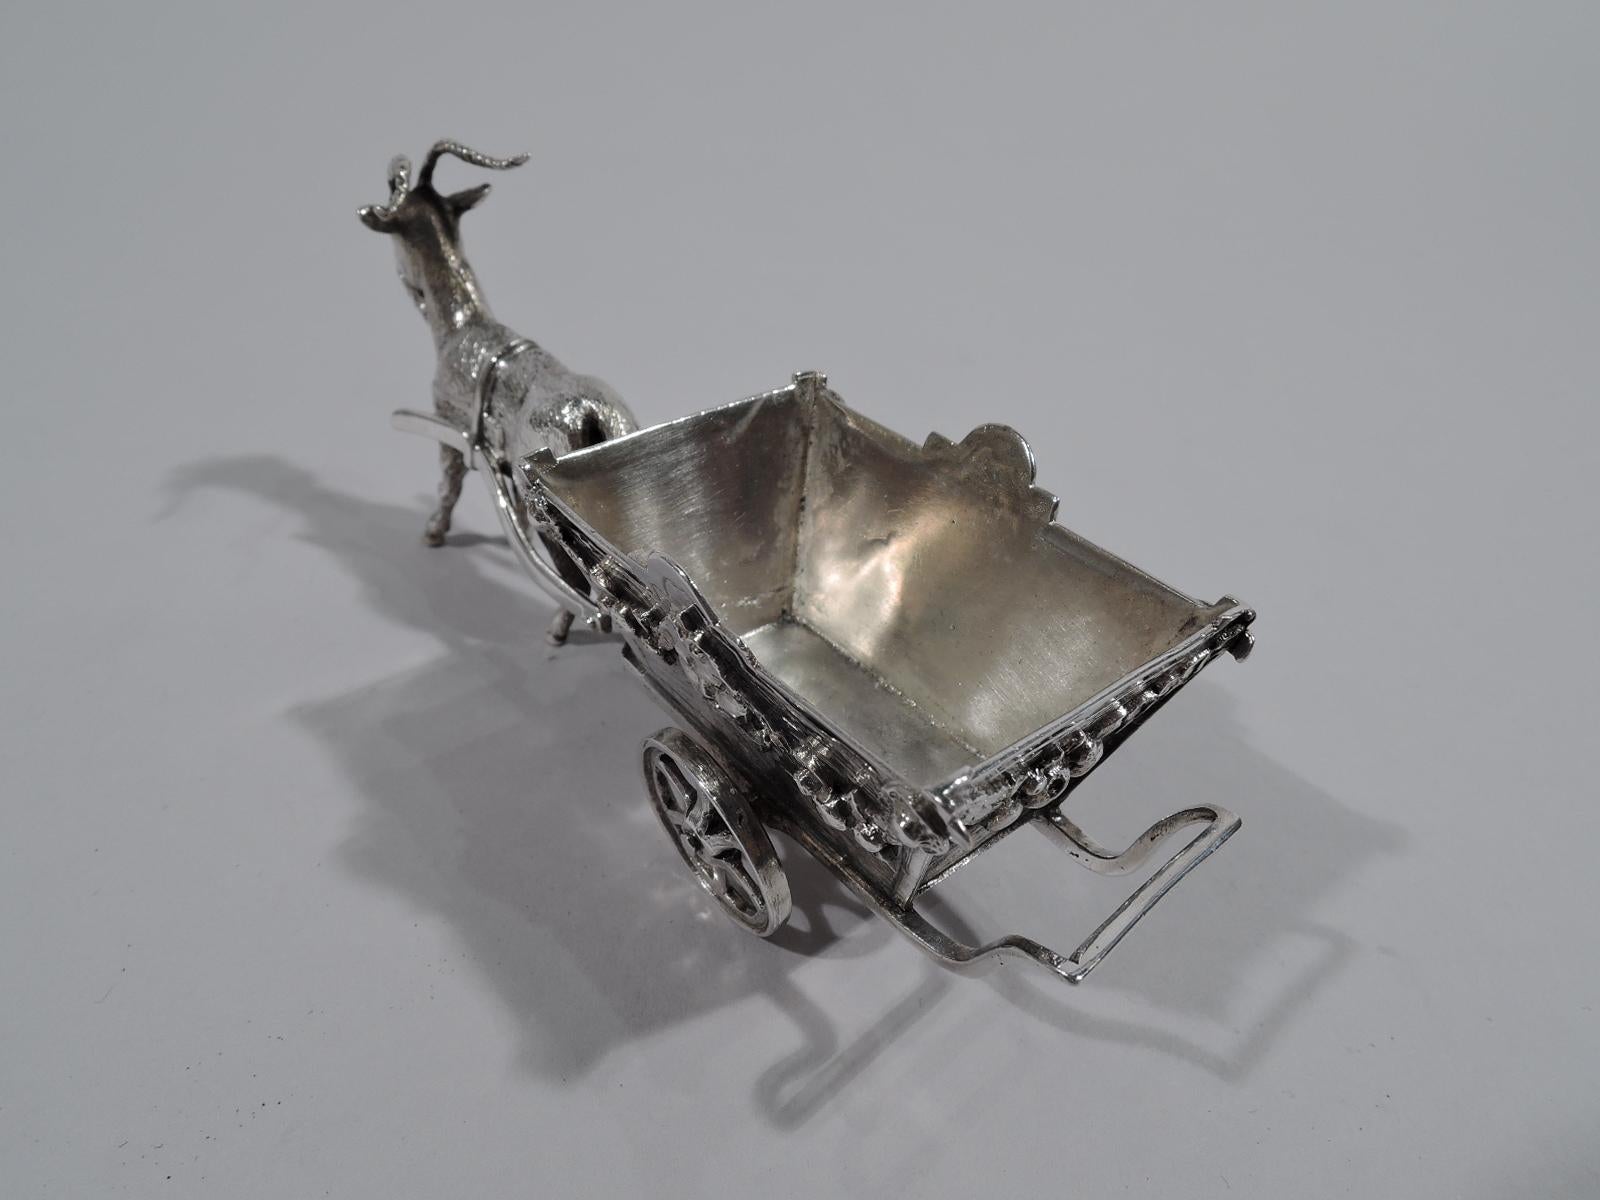 Antique German miniature silver country cart, circa 1900. Flower bedecked with tapering sides made of wood planks. Mounted to open frame that is harnessed to a steady goat. Sweet rural nostalgia. Wheels rotate. Marked. Weight: 2.5 troy ounces.